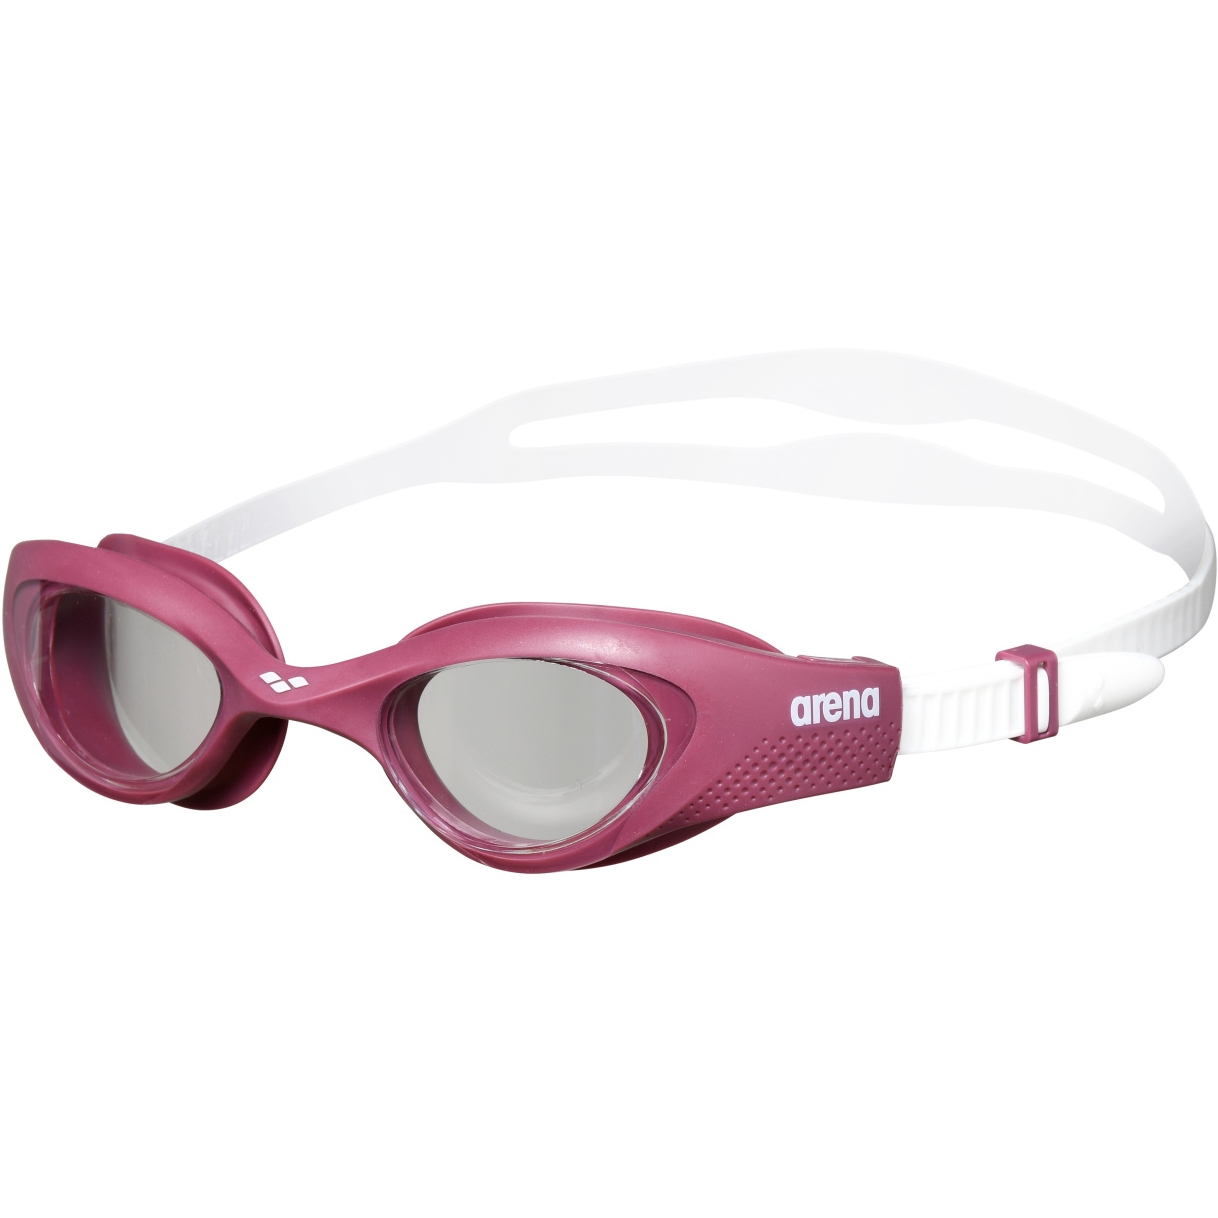 Productfoto van arena The One Zwembril Dames - Transparant - Red Wine/White